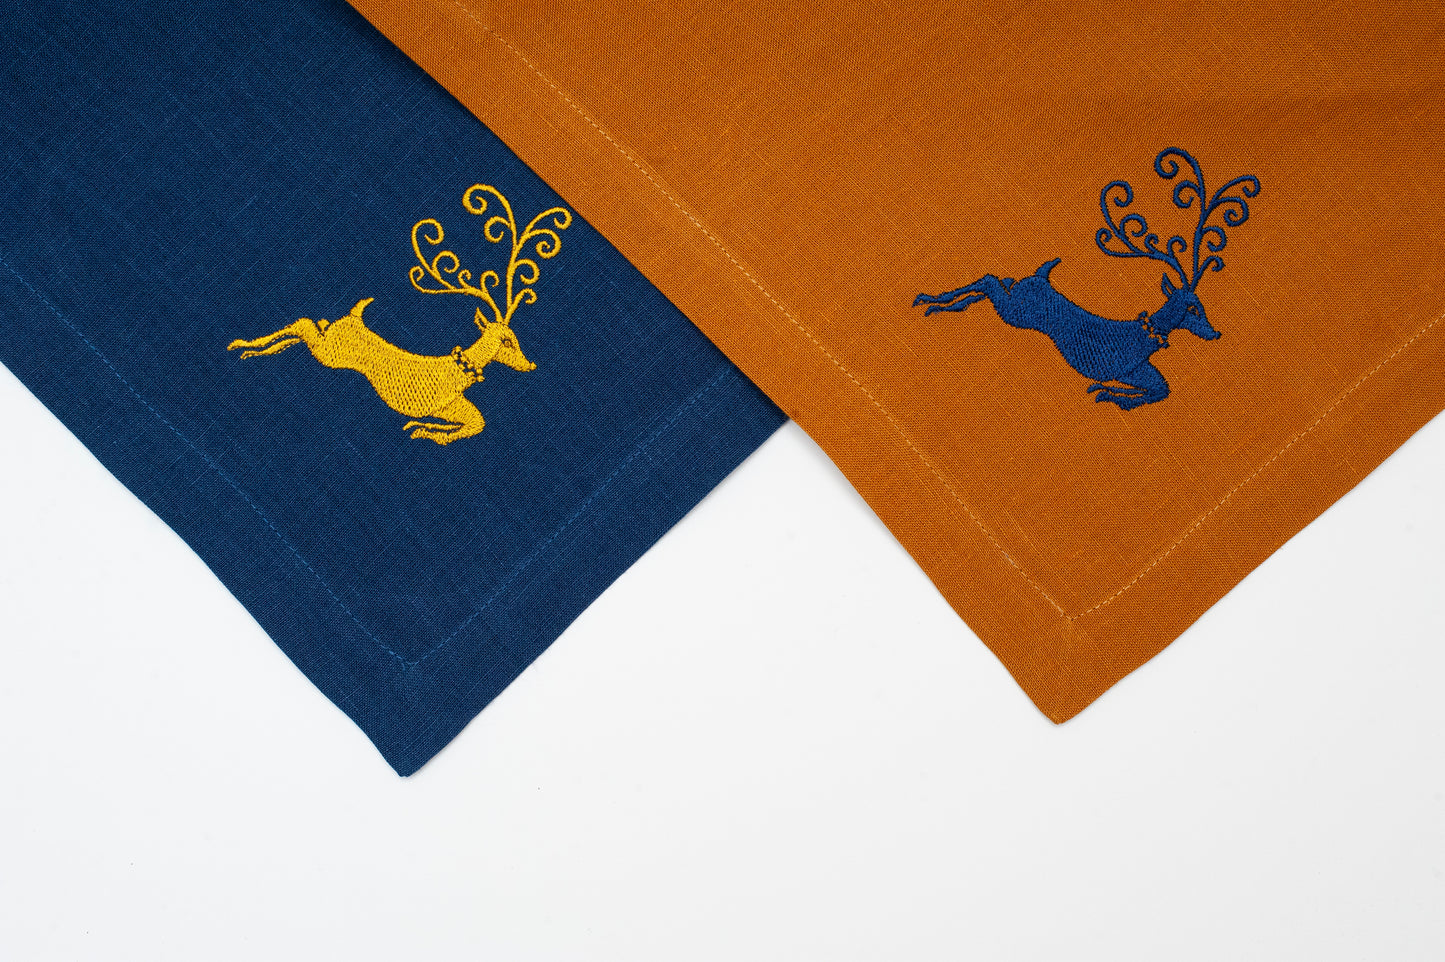 Linen Christmas Napkins with Elegant Embroidery